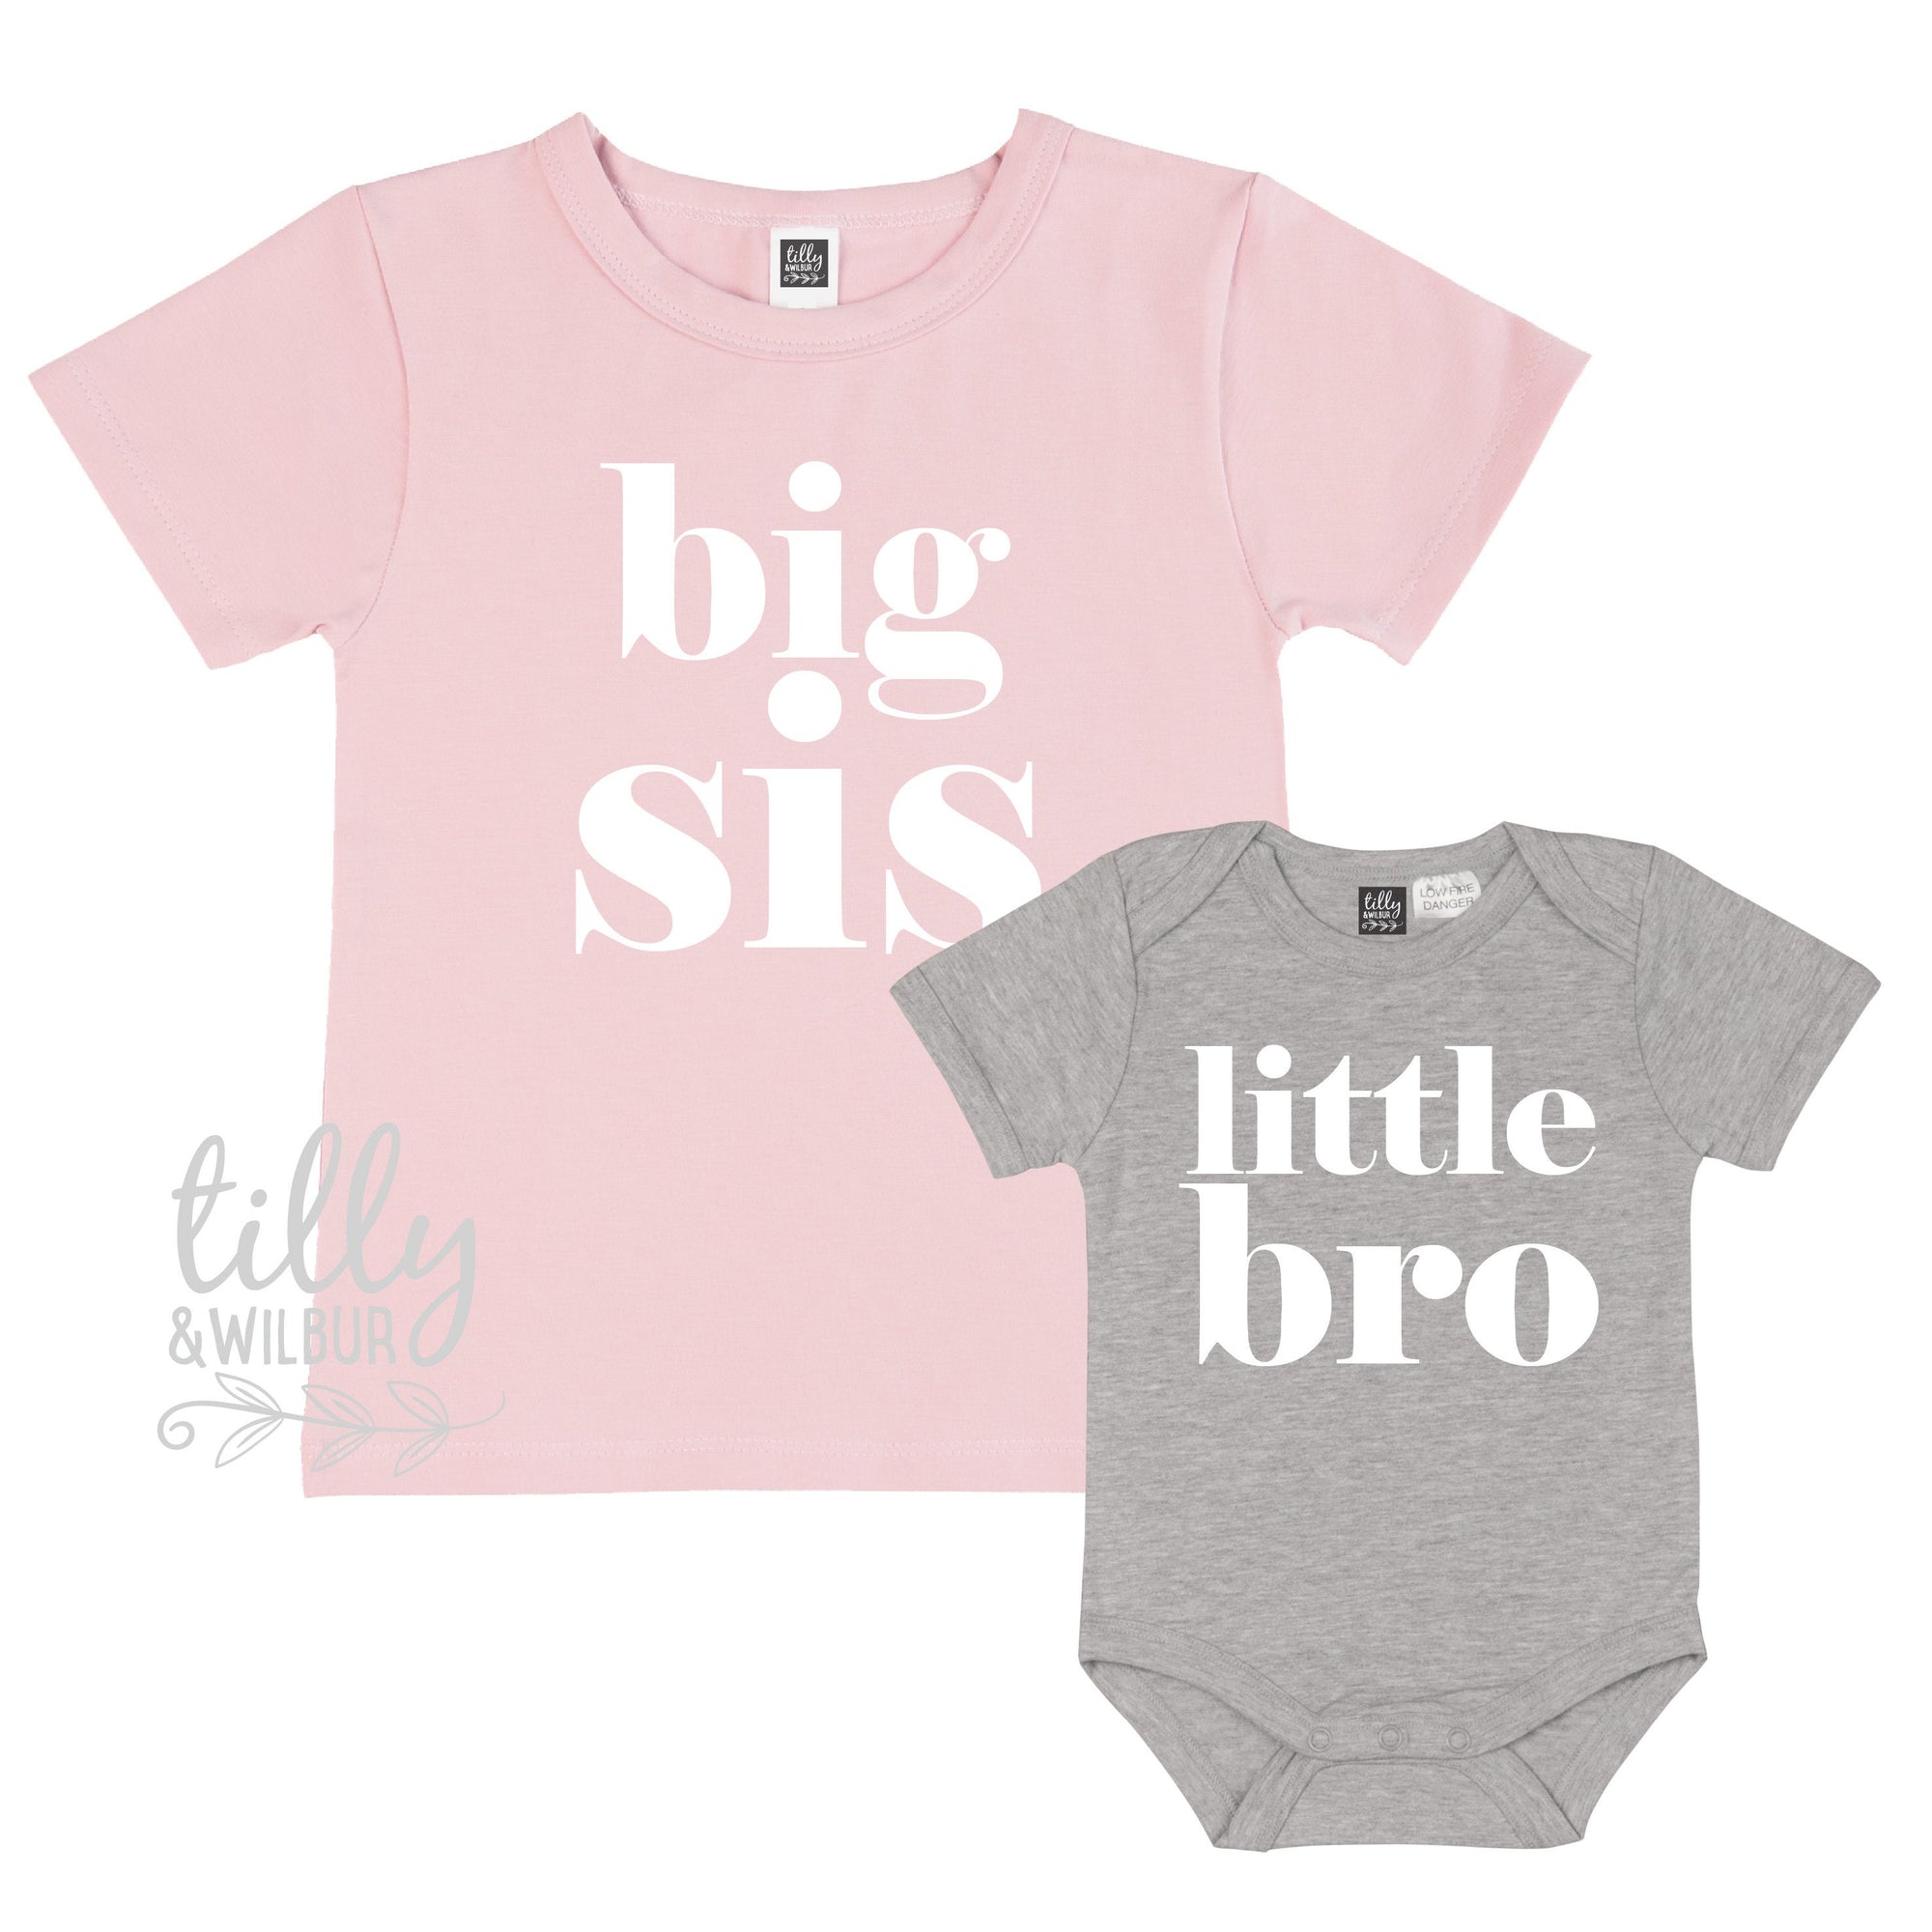 Big Sis Little Bro Set, Matching Sister Brother Outfits, Matchy Matchy Sibling T-Shirts, Big Sister Shirt, Little Brother Bodysuit, Newborn